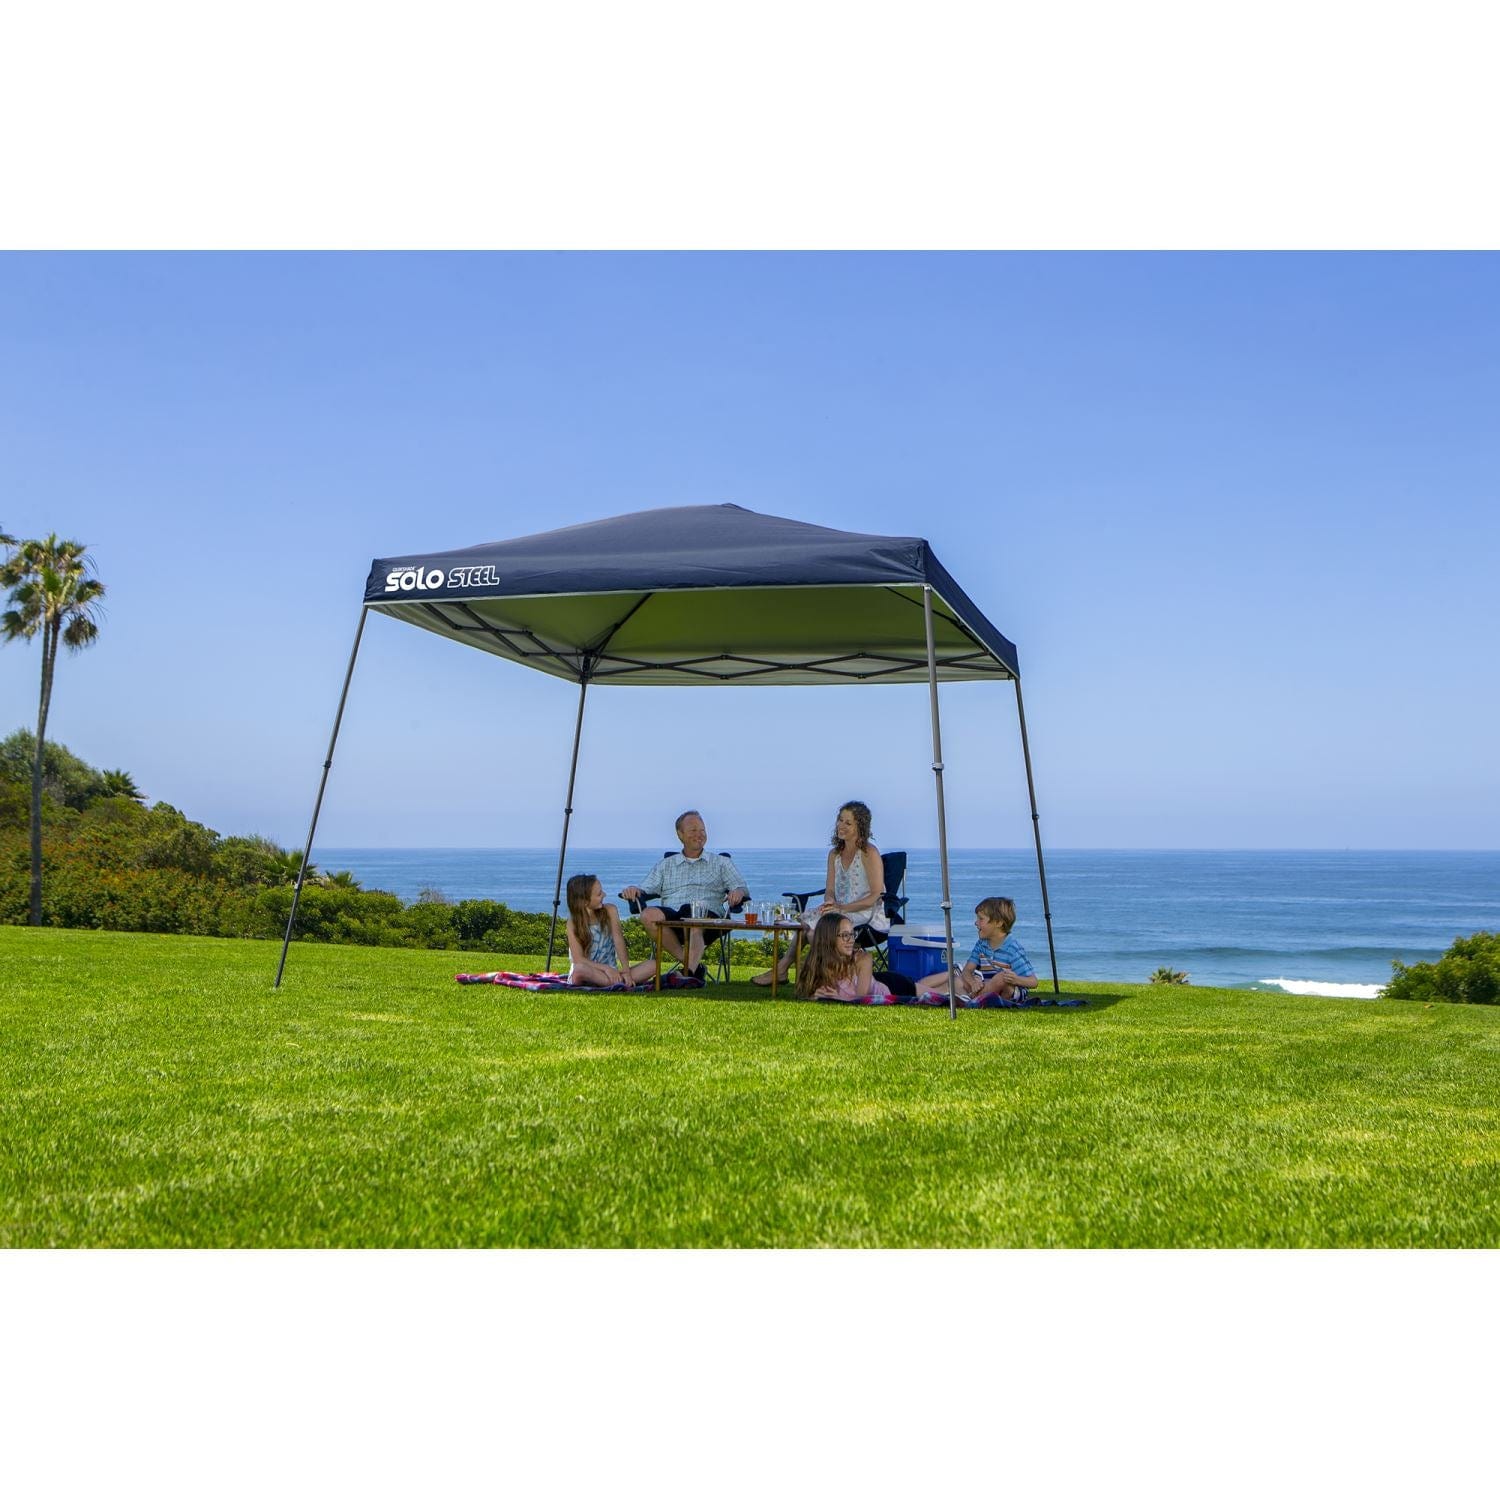 Quik Shade Pop Up Canopies Quik Shade | Solo Steel 90 11' x 11' Slant Leg Canopy - Midnight Blue 167525DS